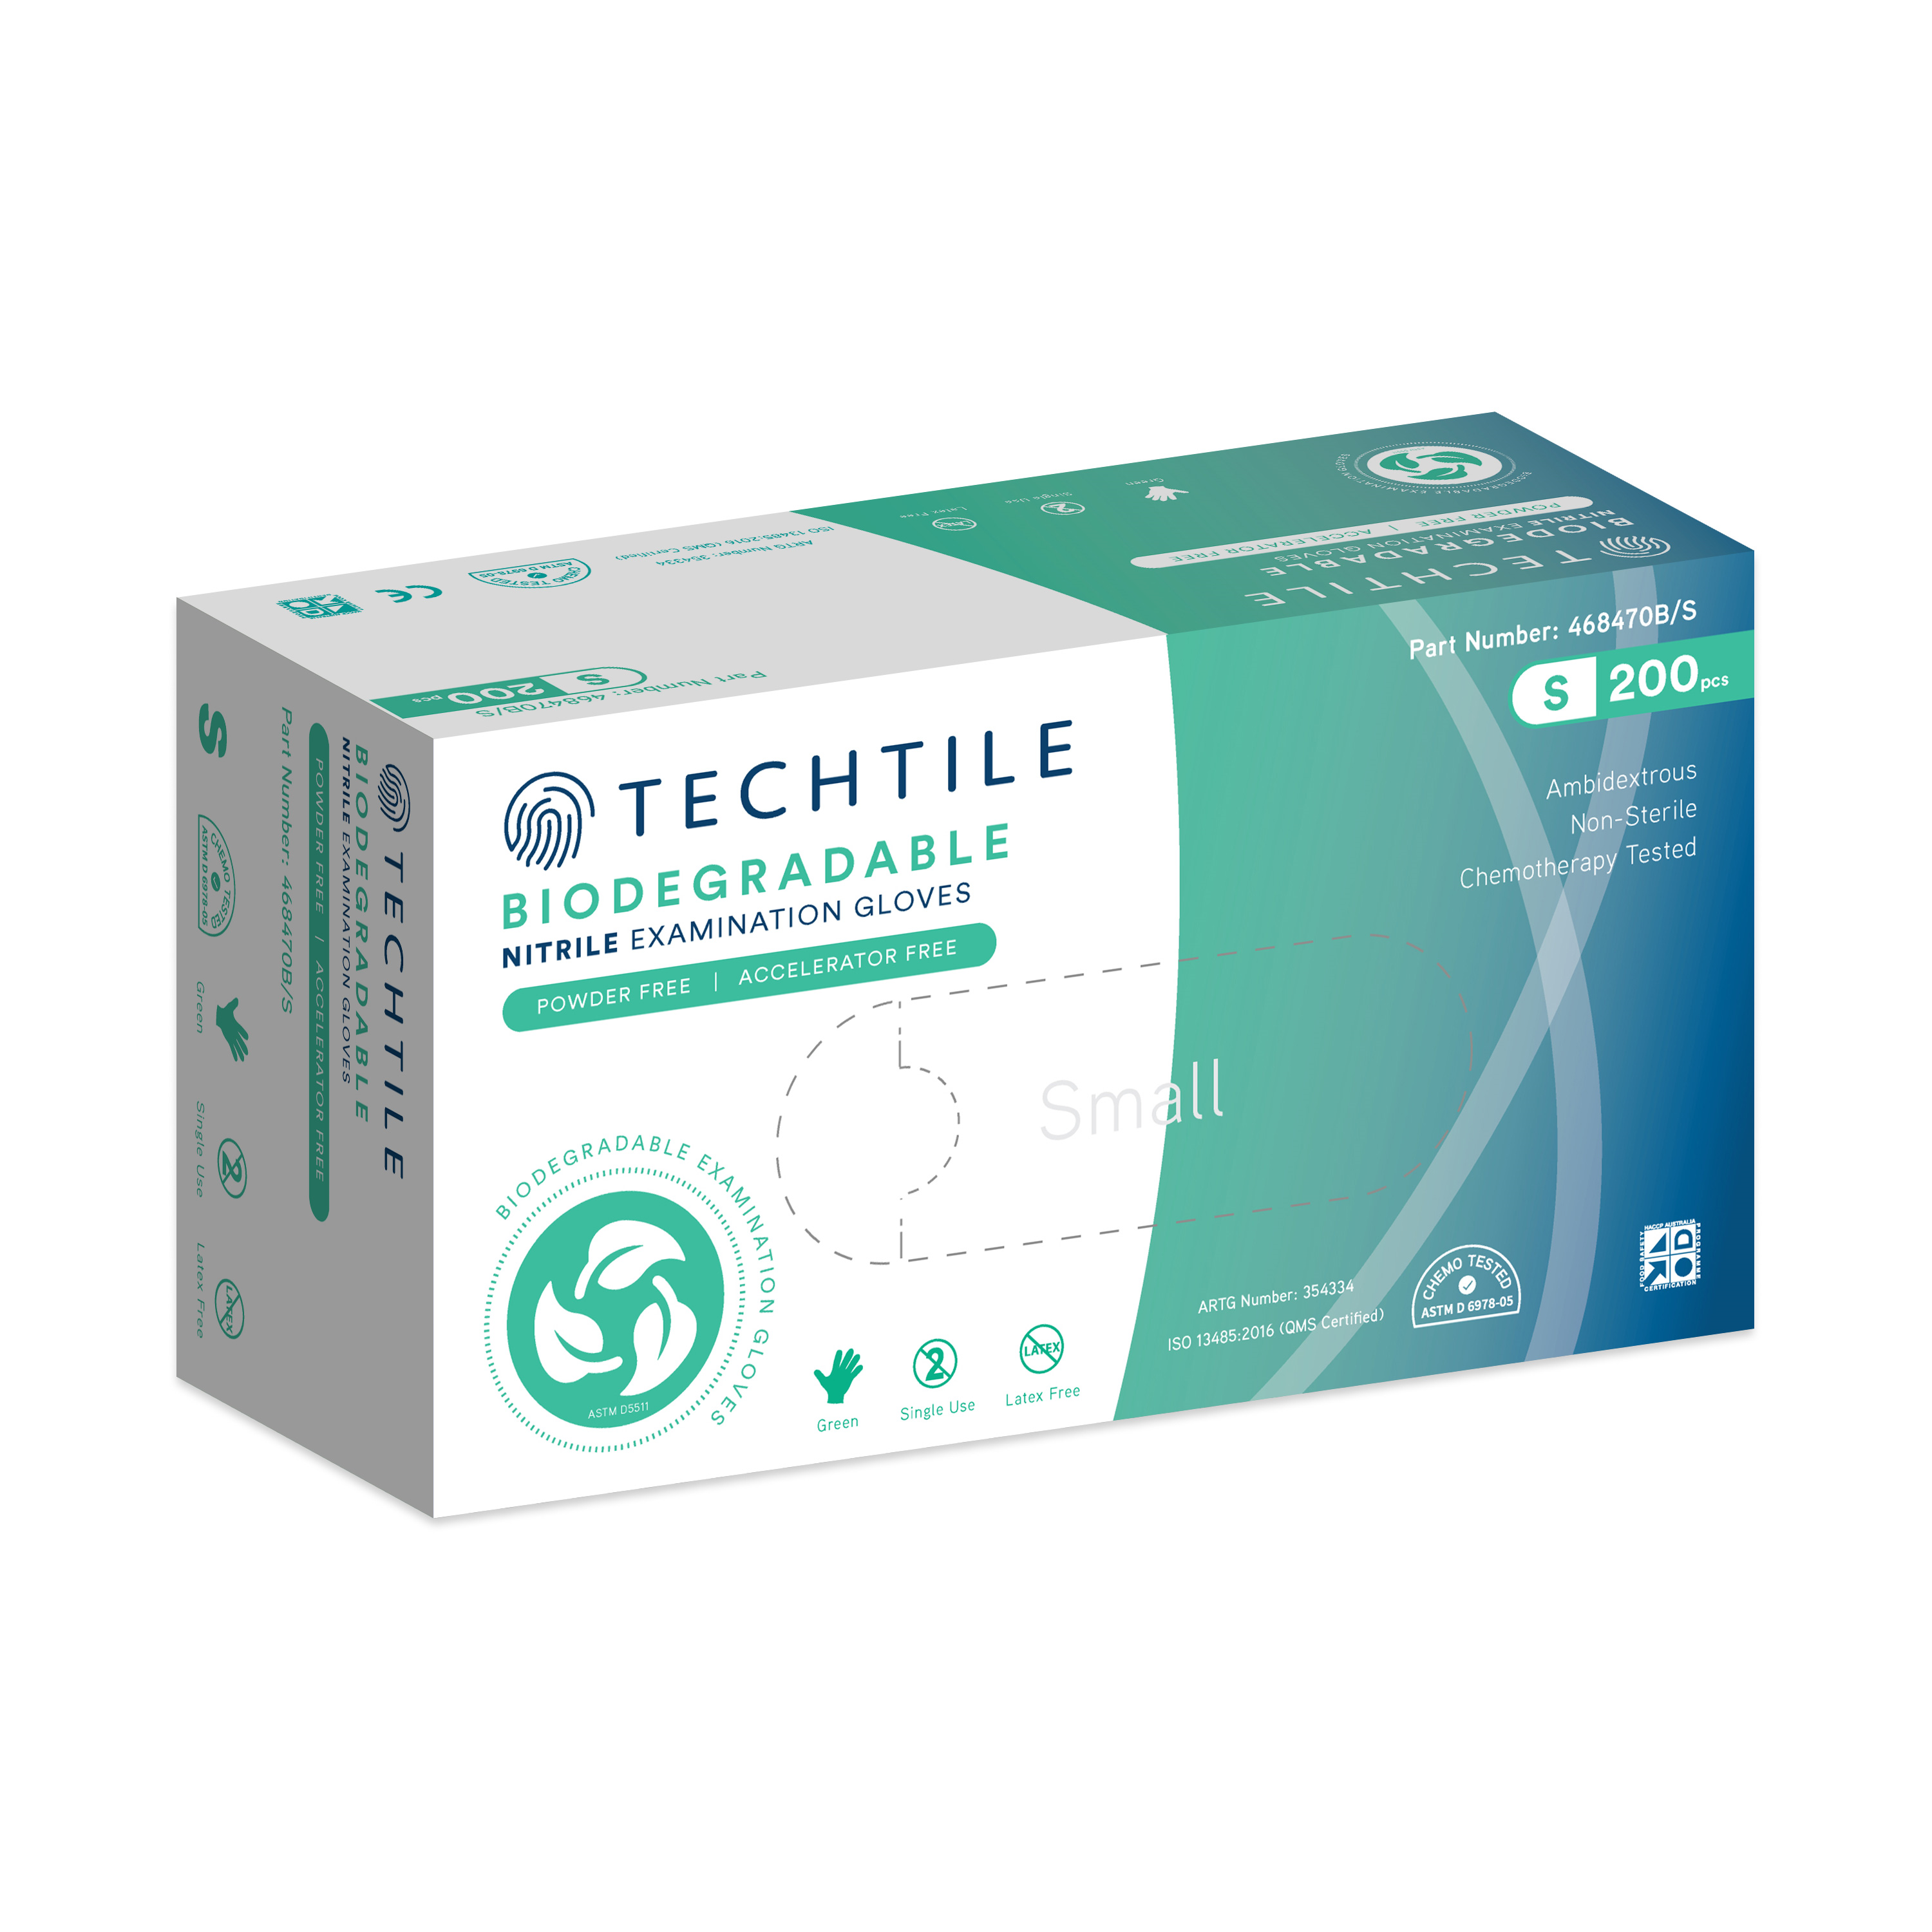 468470B-S (Techtile Biodegradable Examination Nitrile Gloves Powder Free Blue Small)